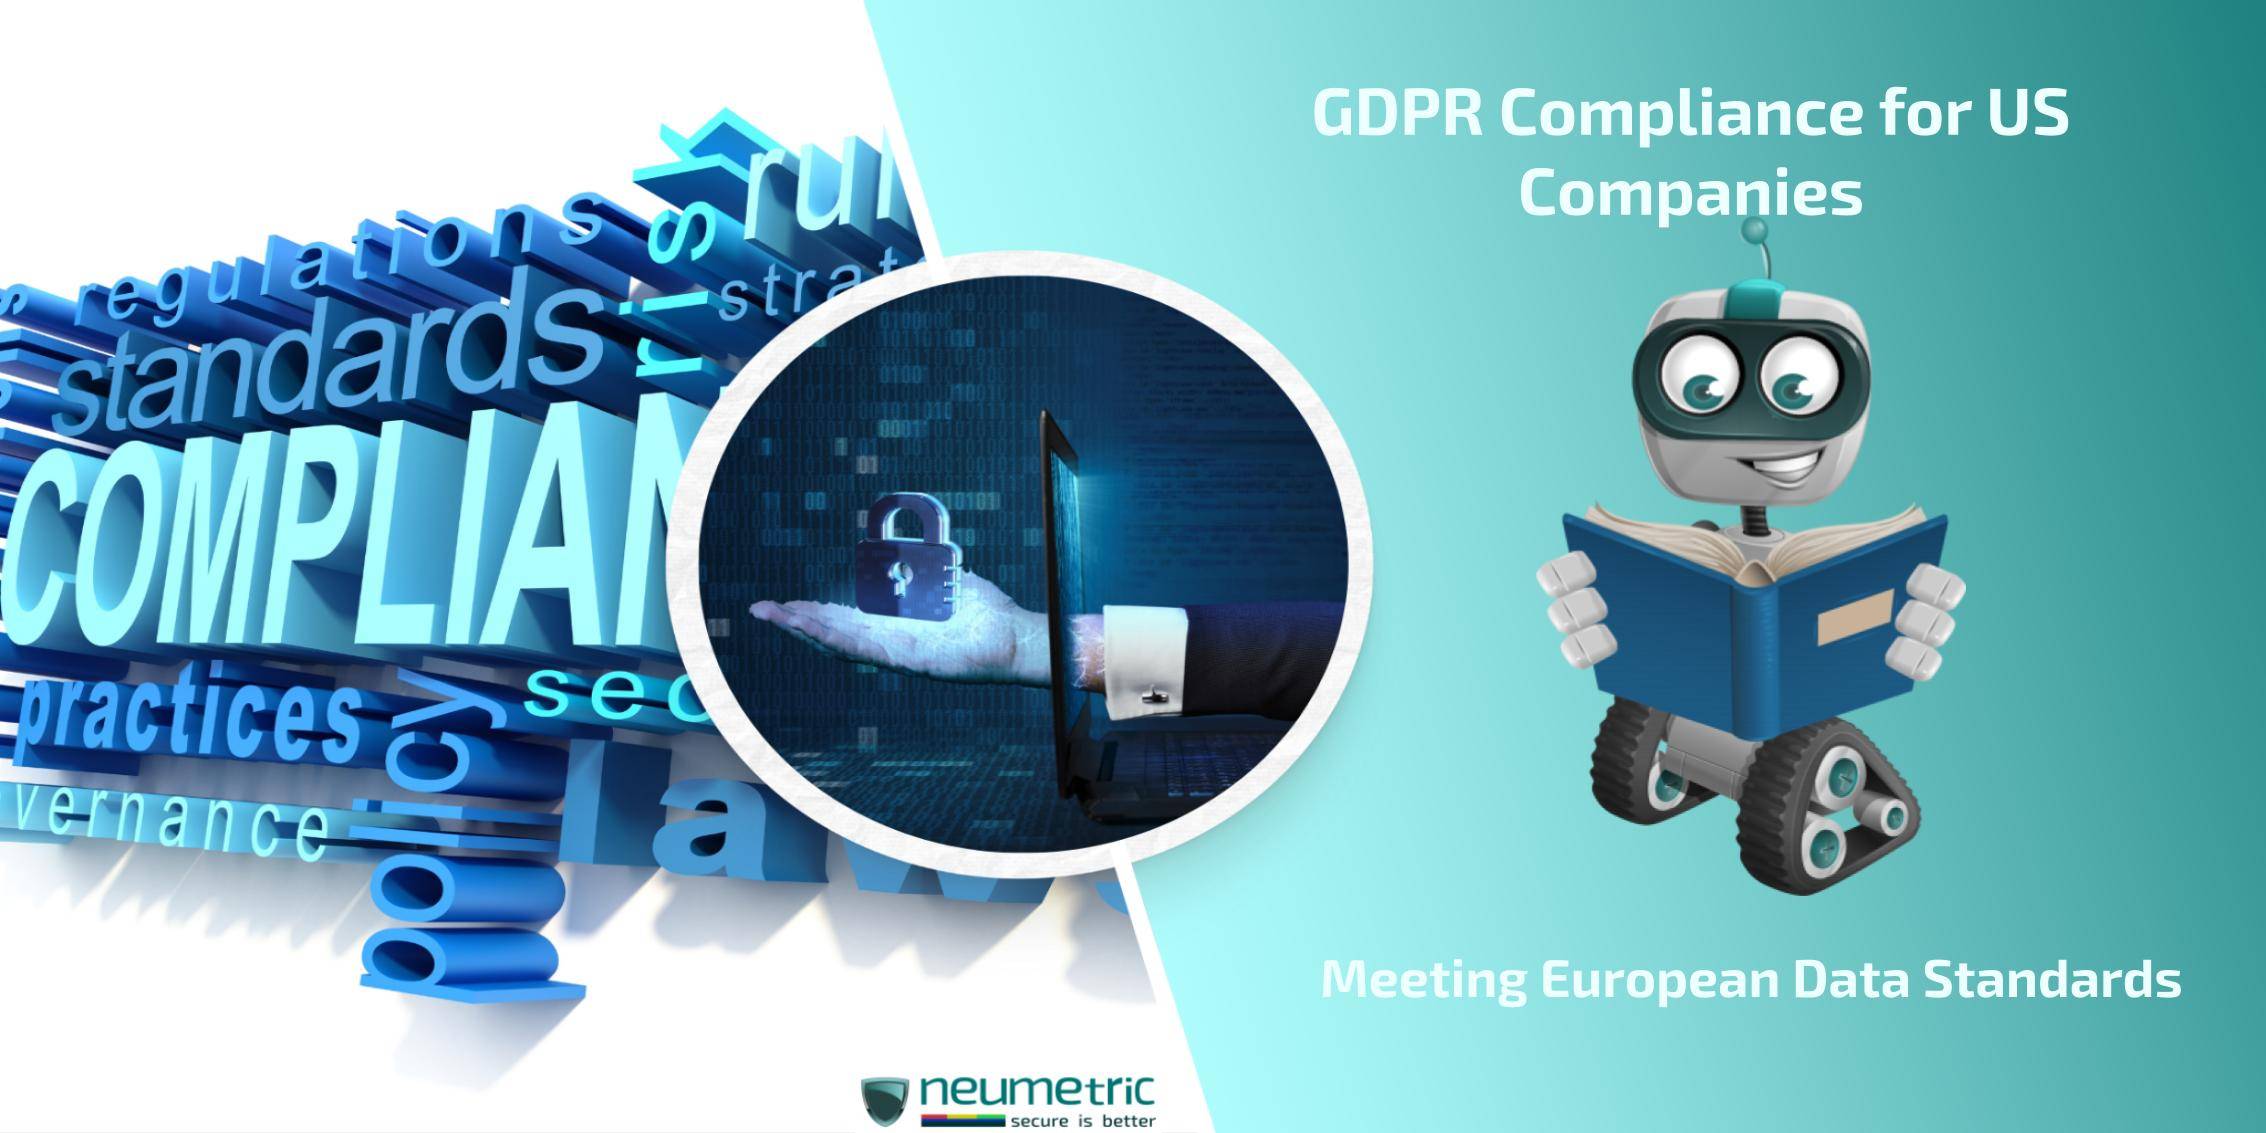 GDPR Compliance for US Companies: Meeting European Data Standards